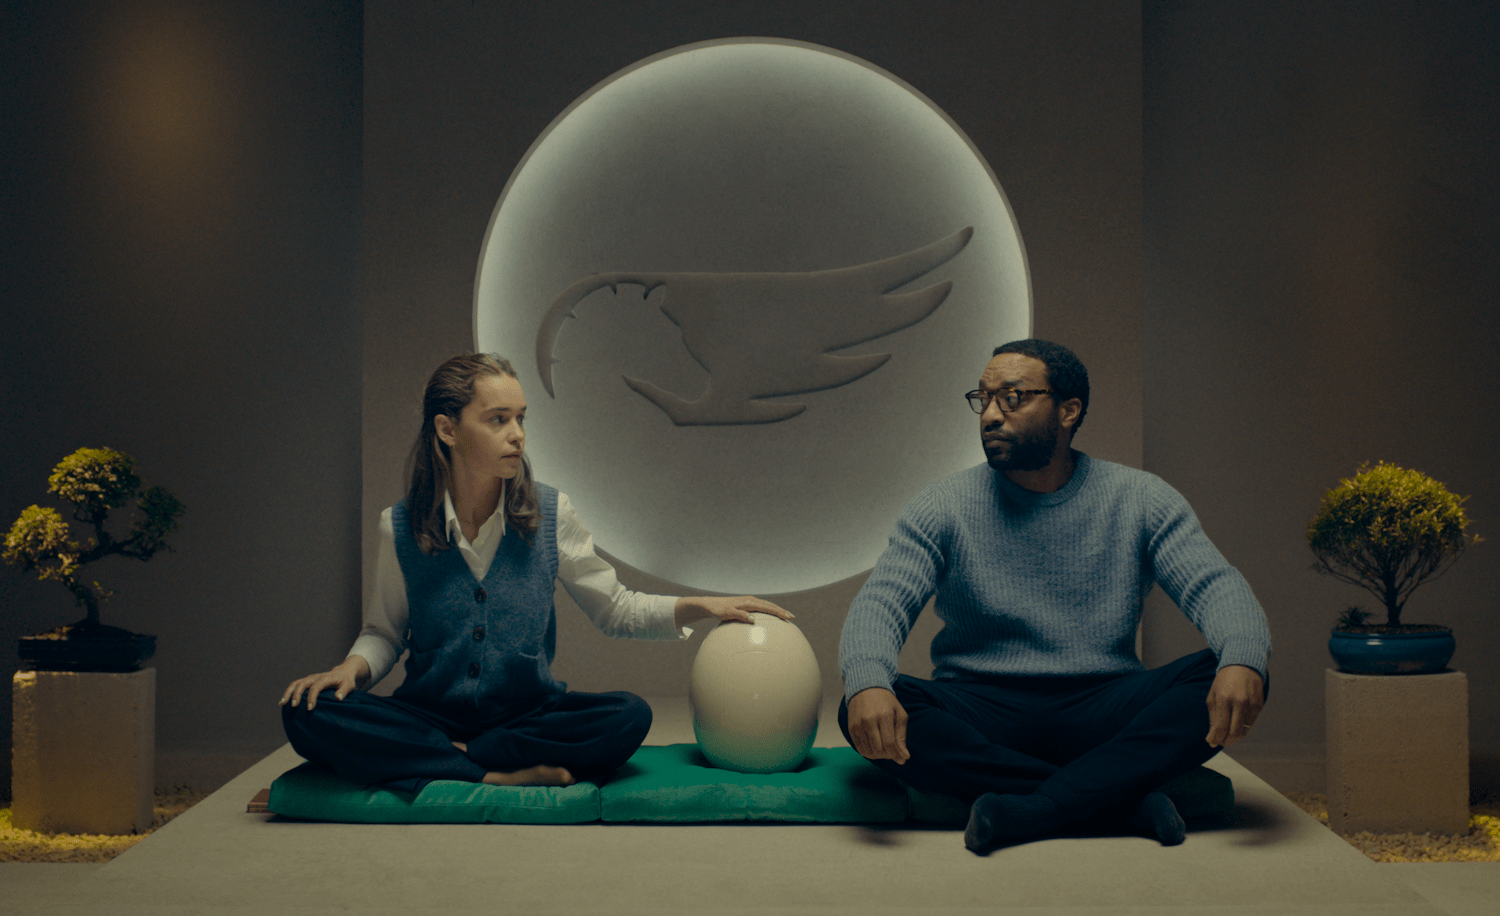 a black man and a white woman sit by a white egg shaped capsule. behind them is a logo for a horse with a wing